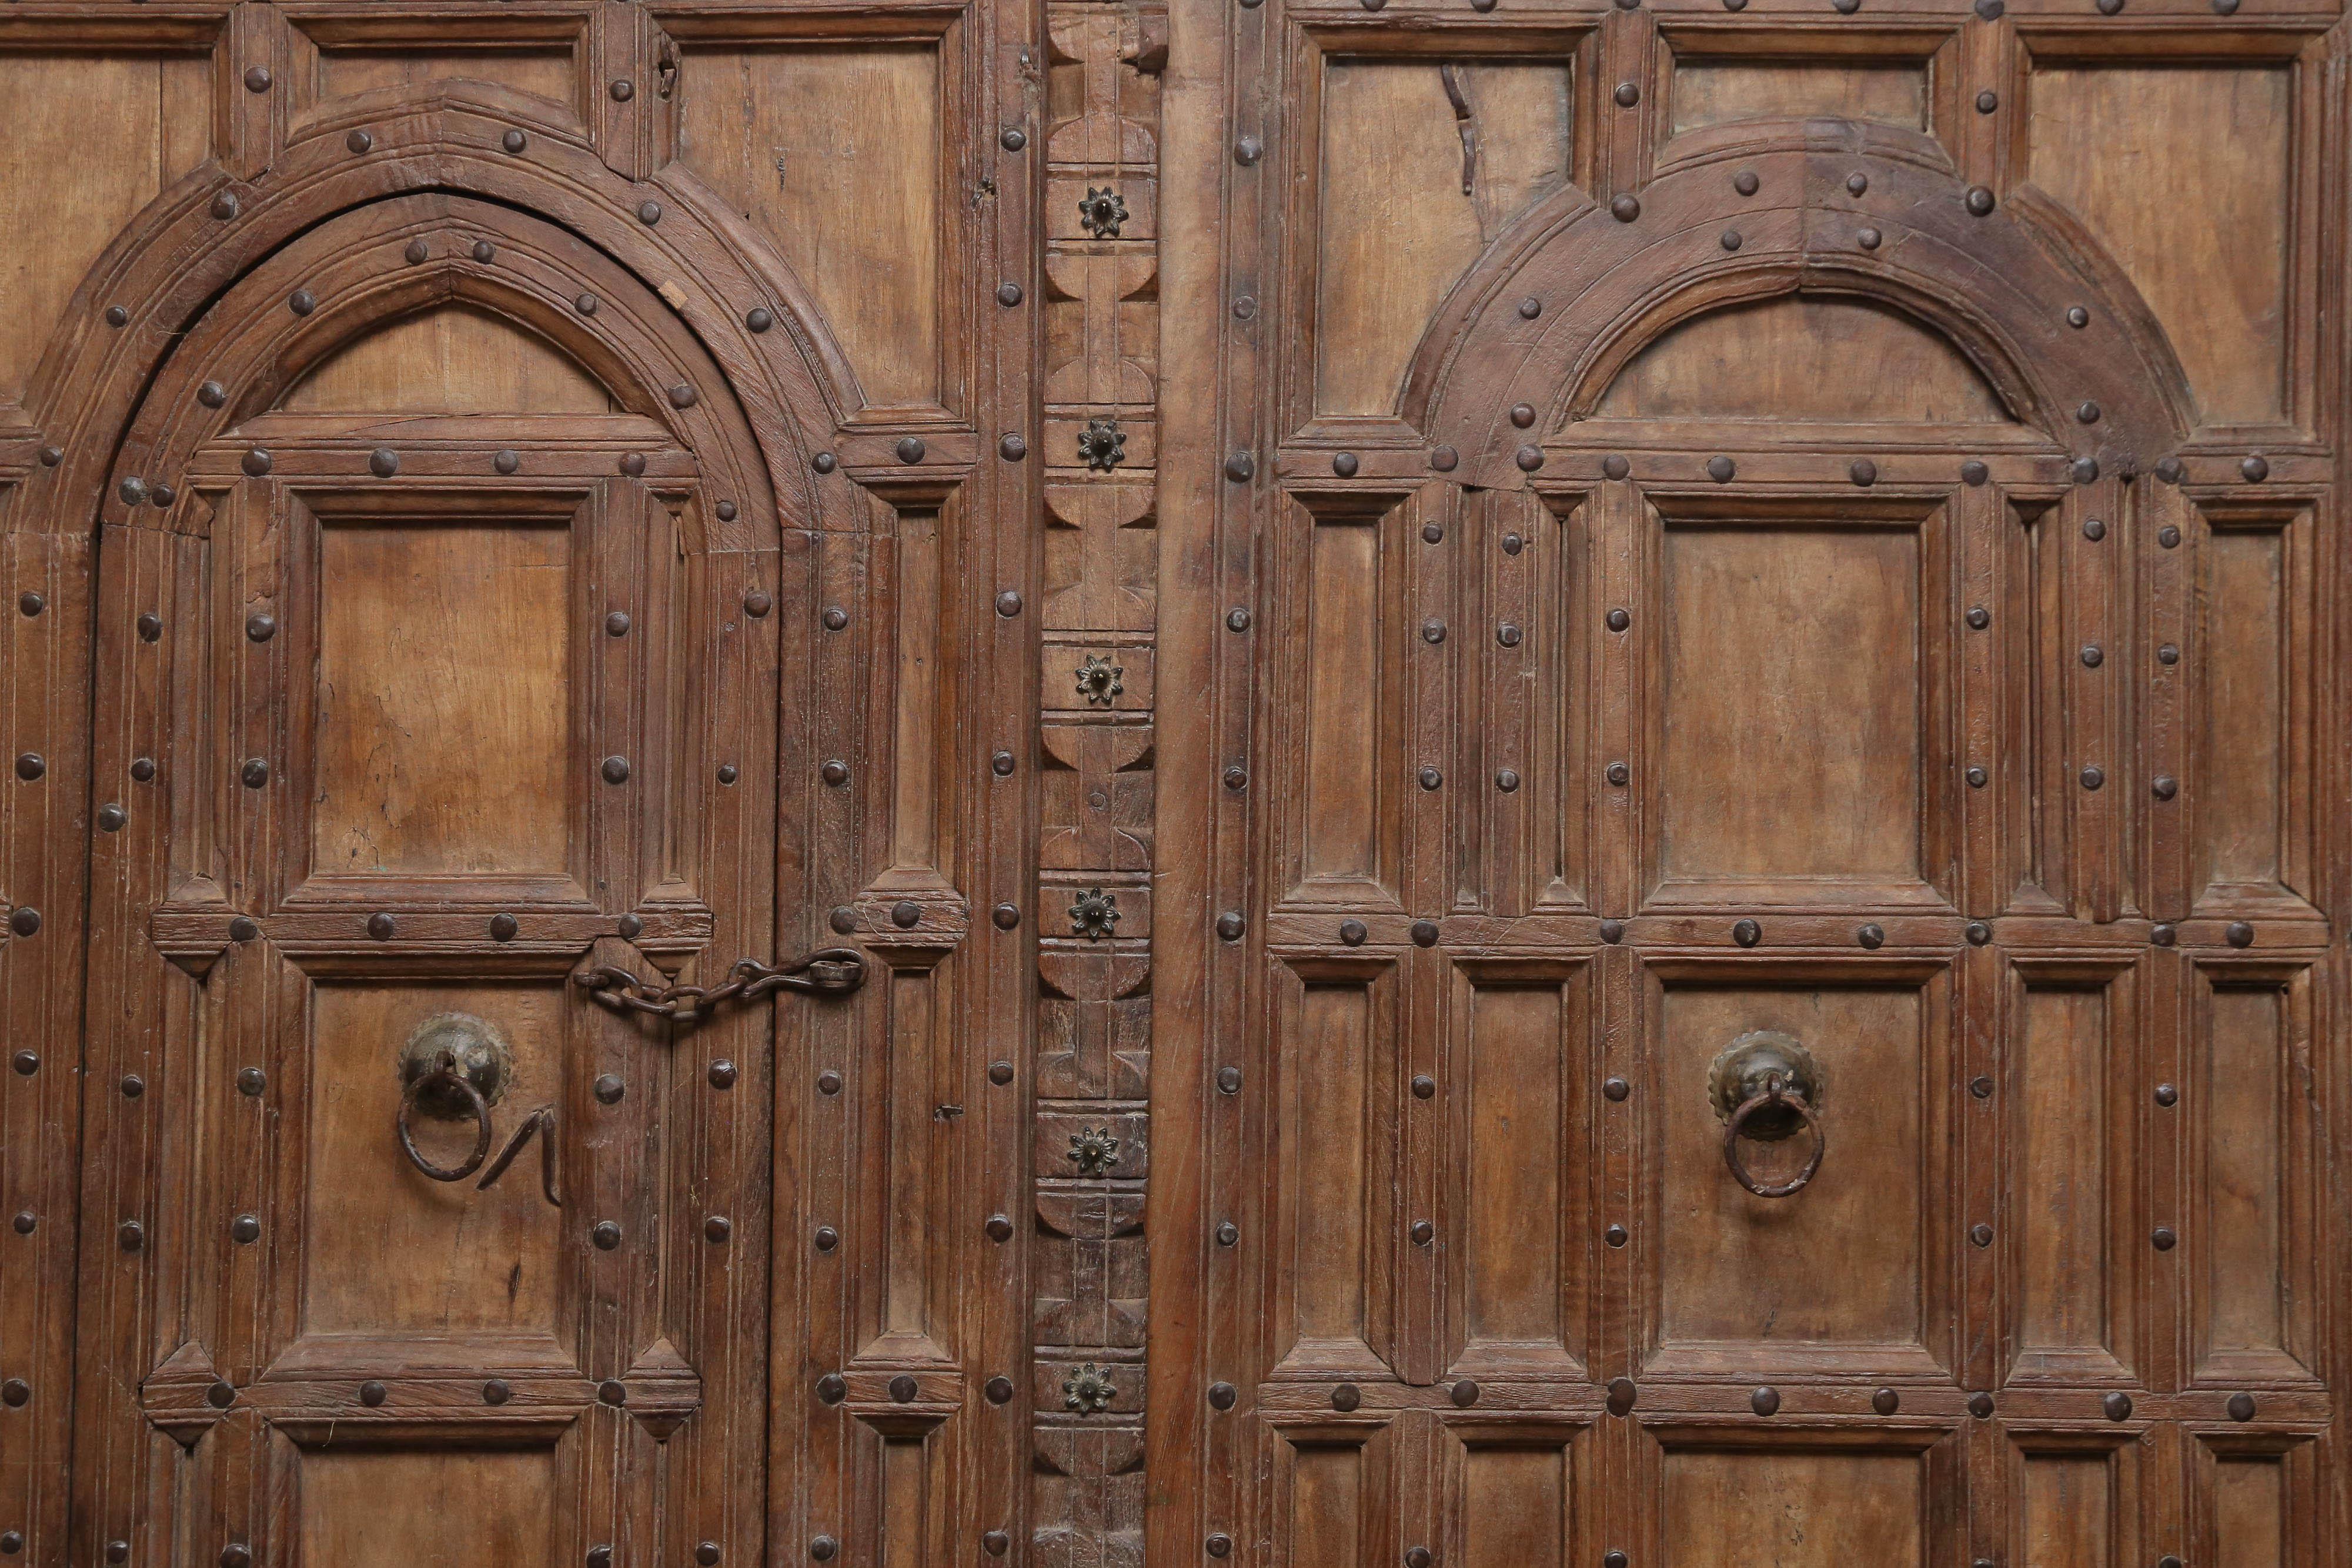 An extremely rare magnificent door from a fortified building in the north west frontier province in India. It was made in 1840's by using the finest teak wood available at that time. Fully hand crafted by handpicked artisans. It is a mixture of